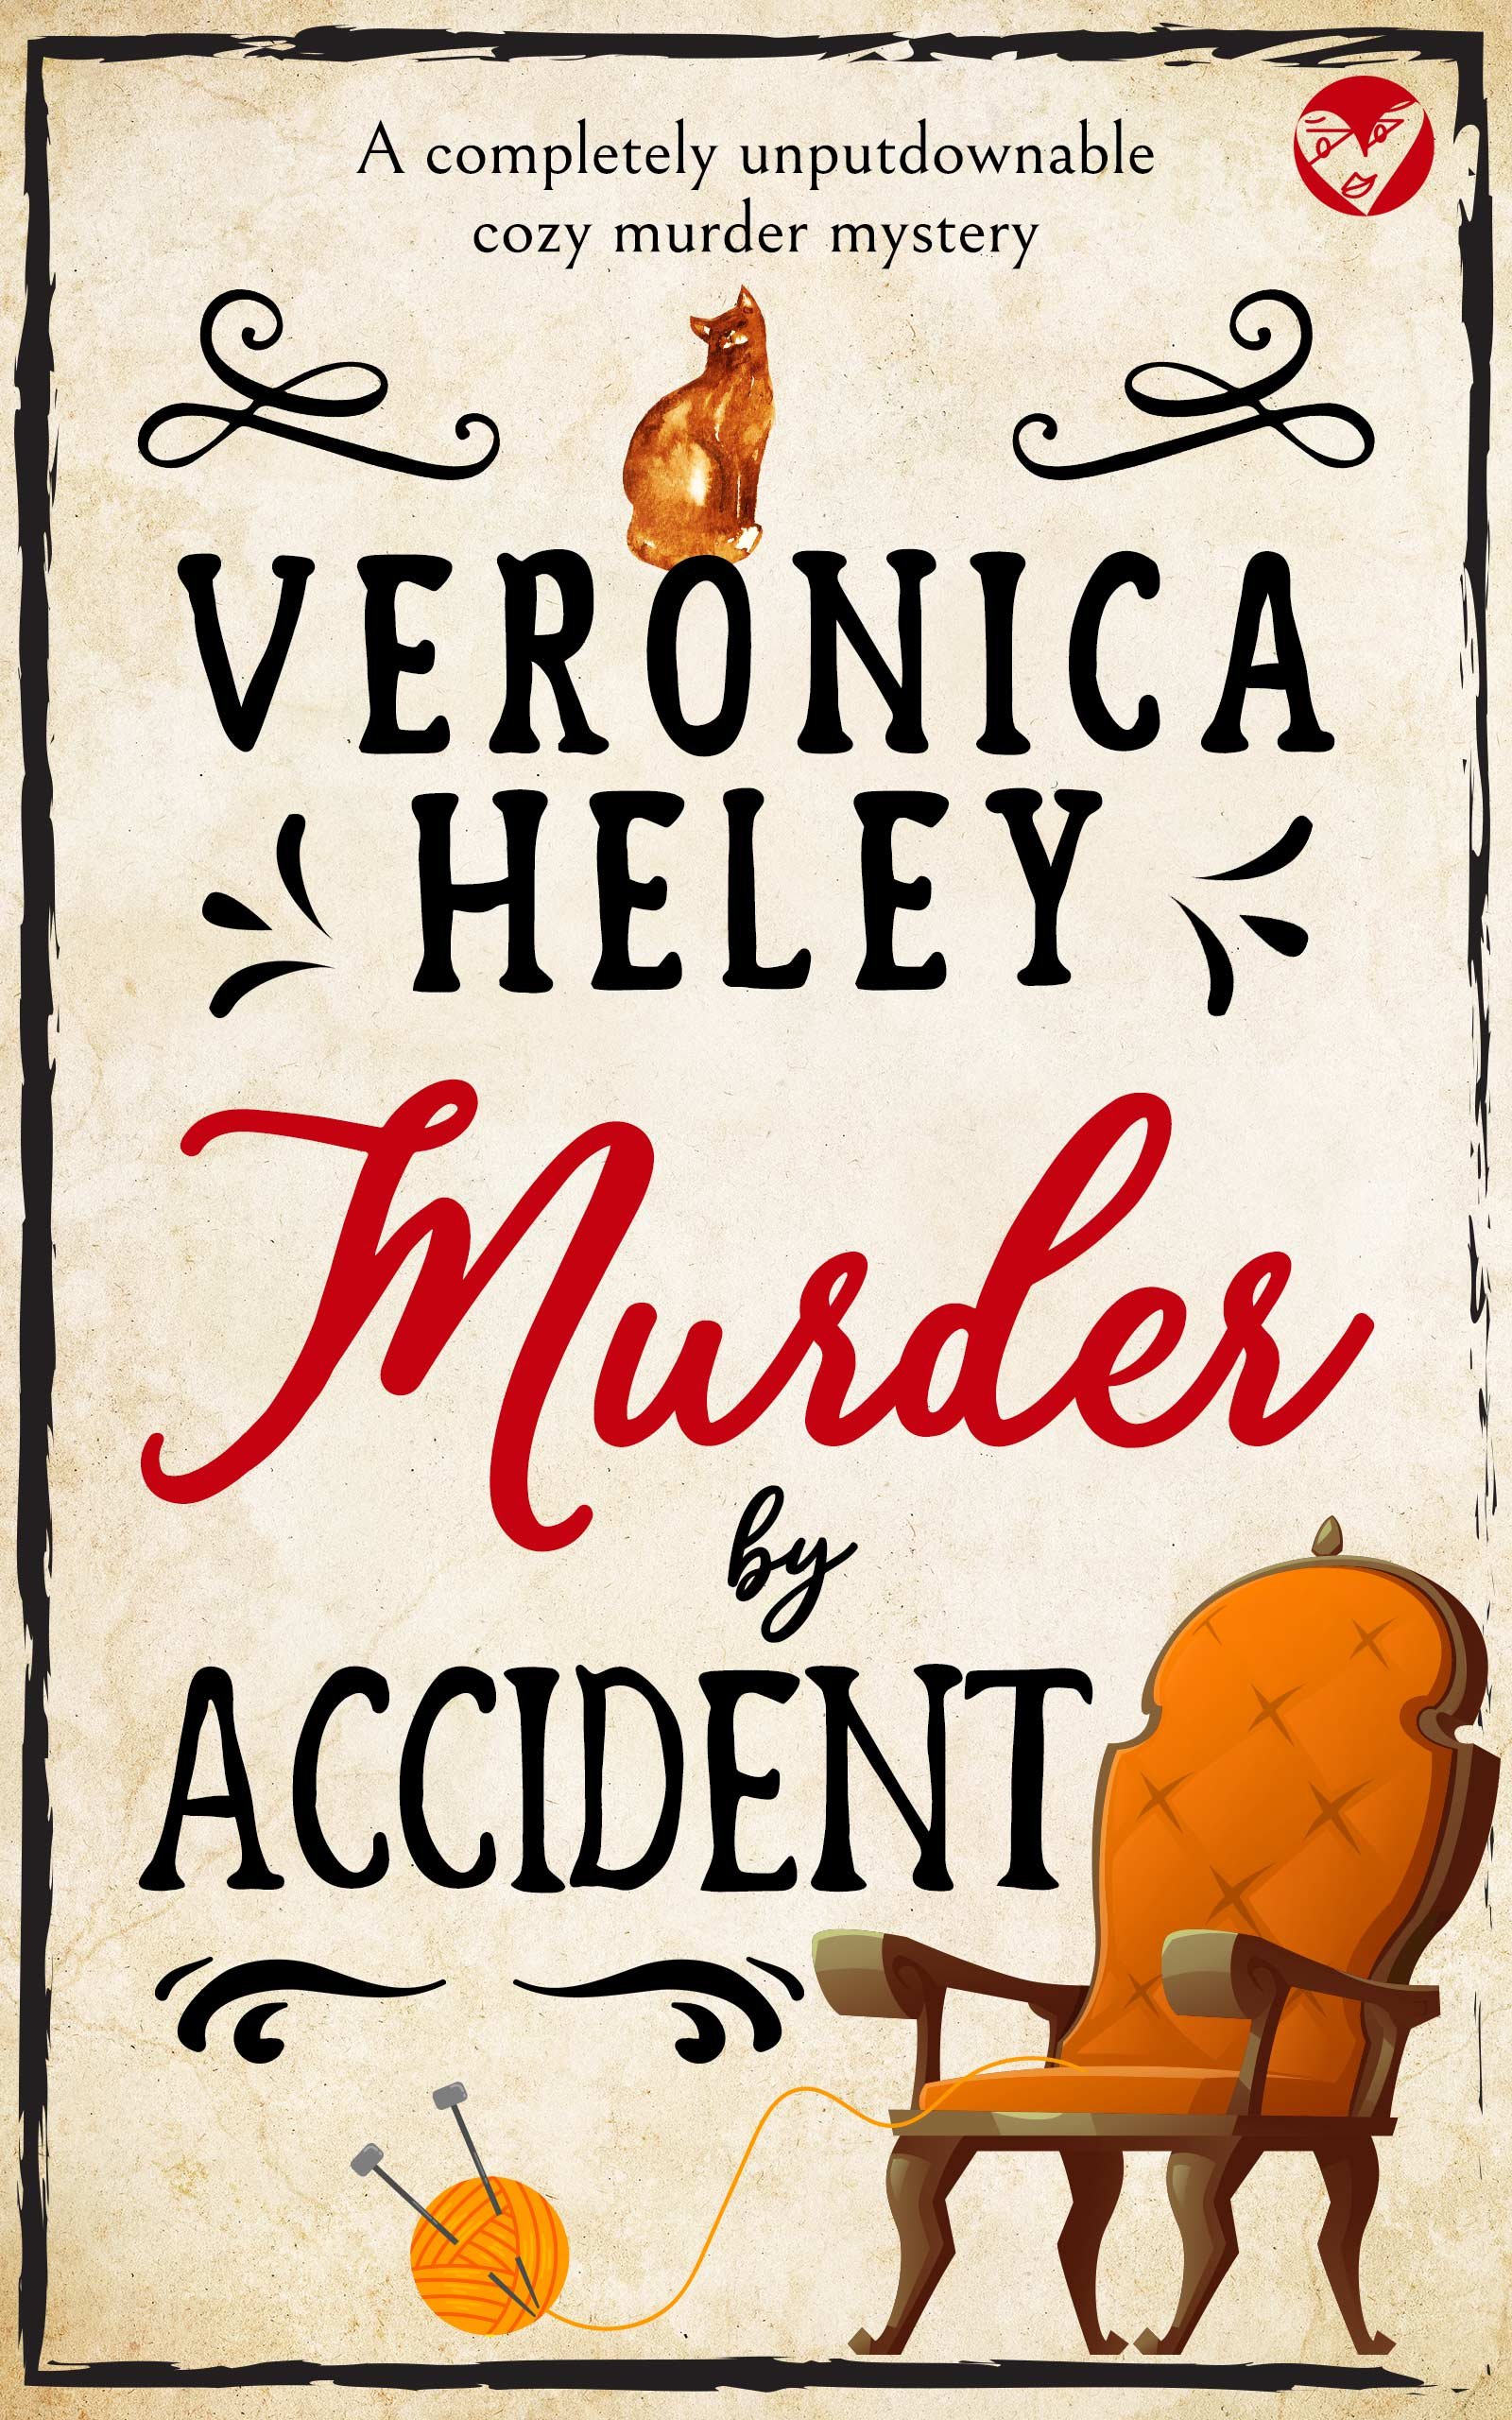 MURDER BY ACCIDENT 517k cover publish.jpg